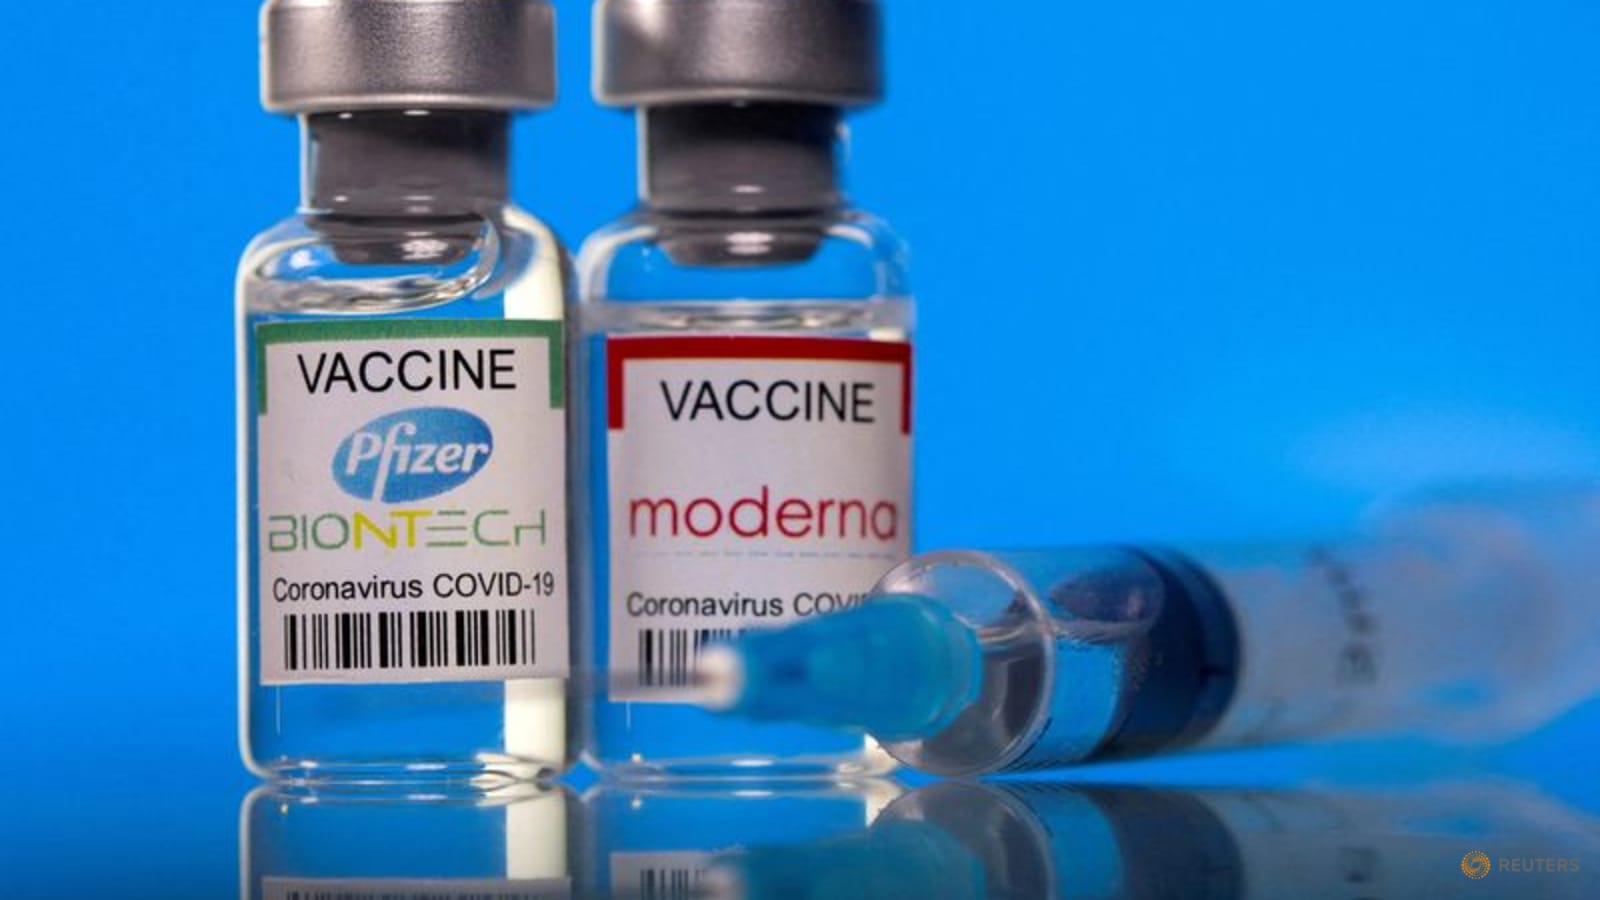 covid-19-vaccine-scheme-for-world’s-poorest-pushes-for-delivery-slowdown